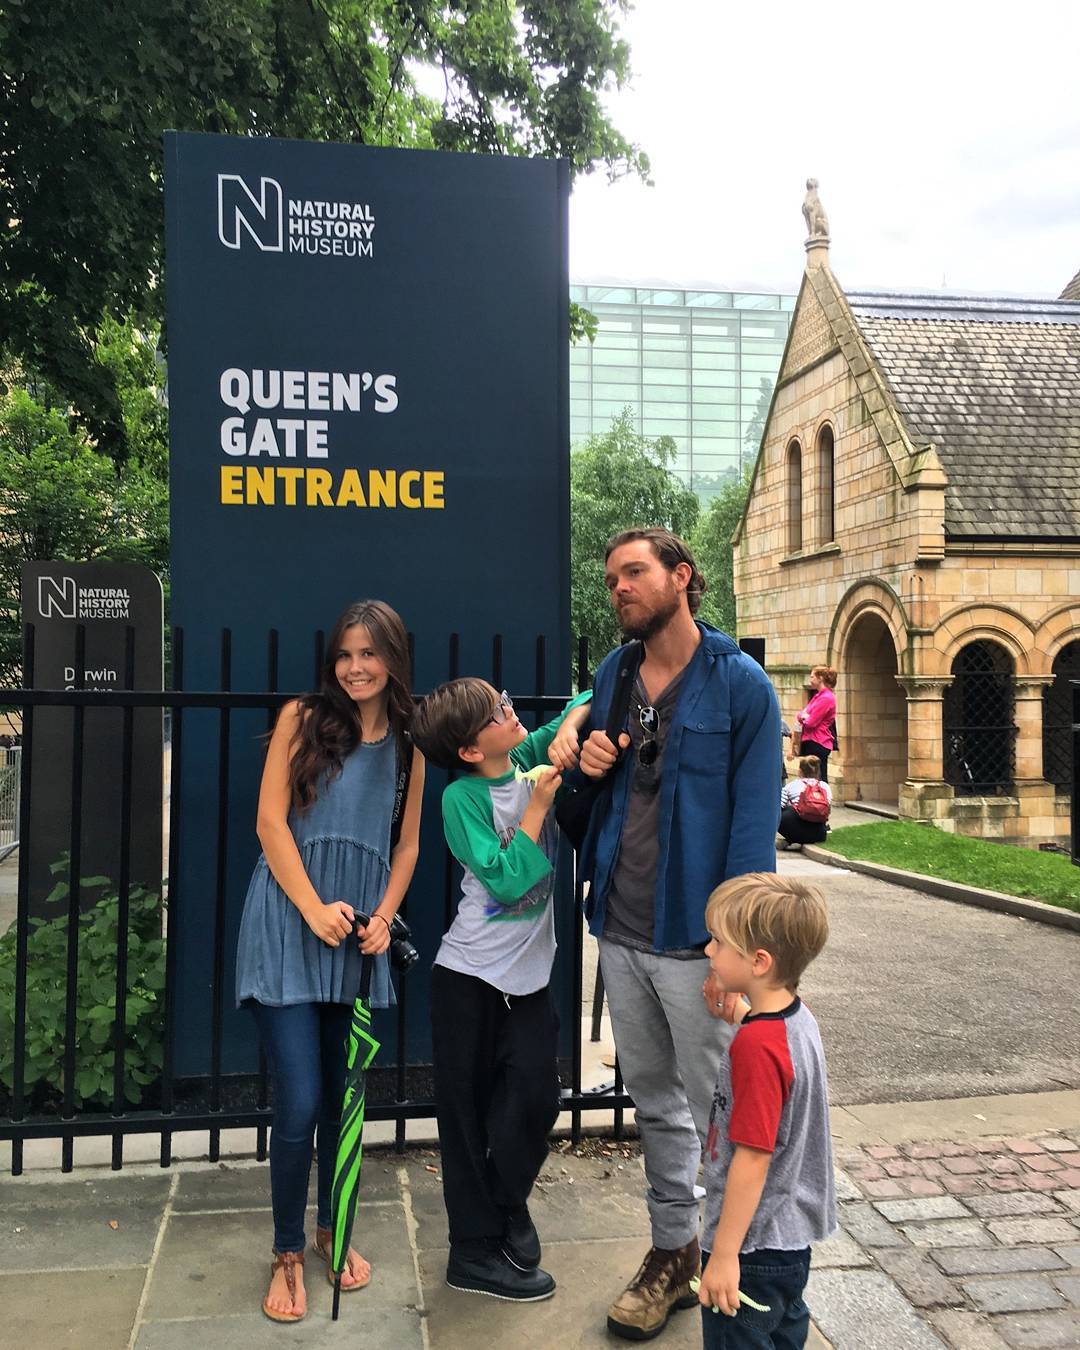 Clayne Crawford in a dark blue jacket and light blue jeans posing with his children at Queen's Gate Entrance.